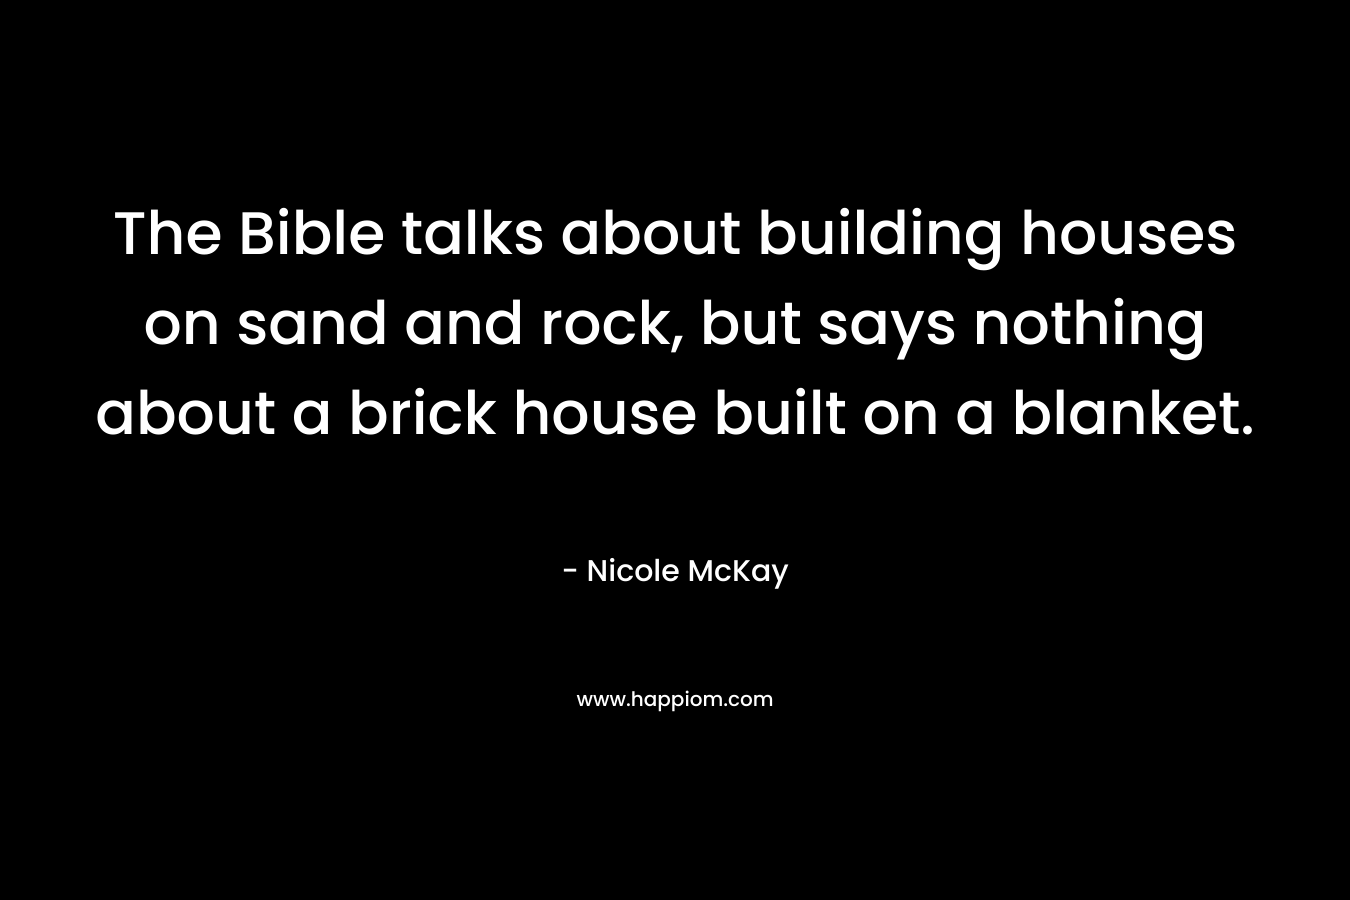 The Bible talks about building houses on sand and rock, but says nothing about a brick house built on a blanket. – Nicole McKay